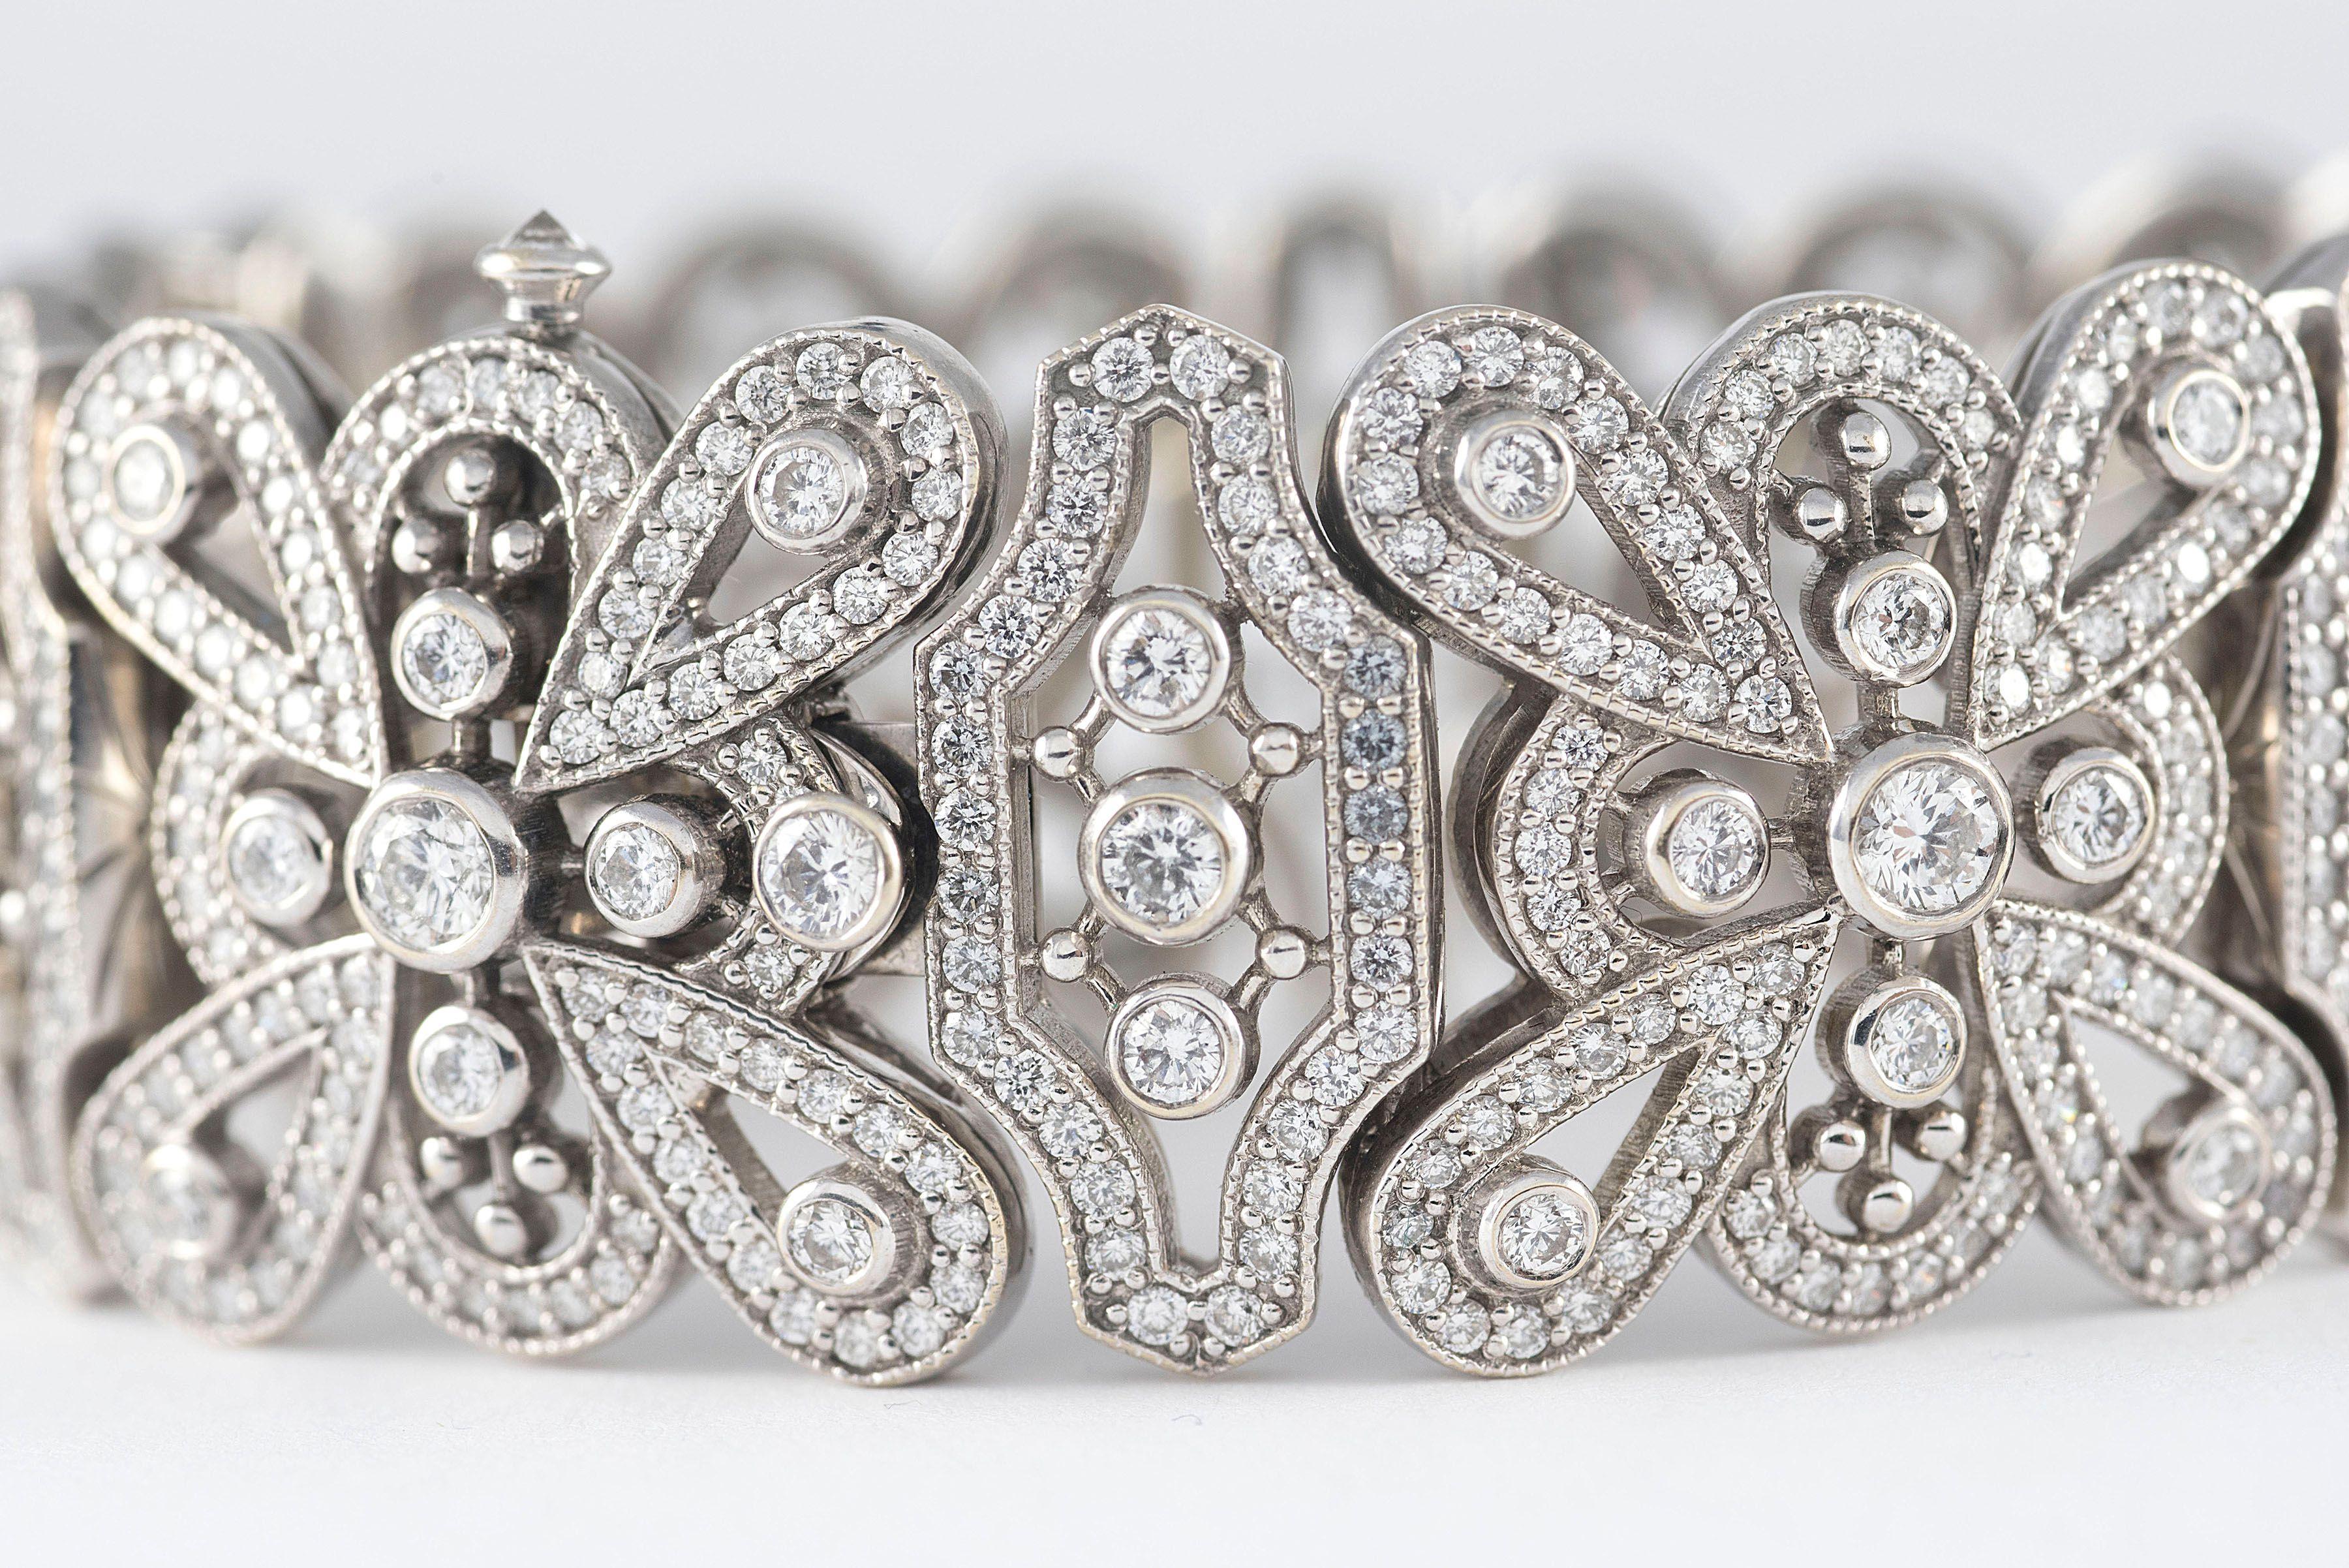 Intricately crafted in 18kt white gold, this exquisite custom made wide link bracelet features 11.28 carats of round diamonds, F color, VS-VVS clarity arrayed over a fanciful openwork design. 

